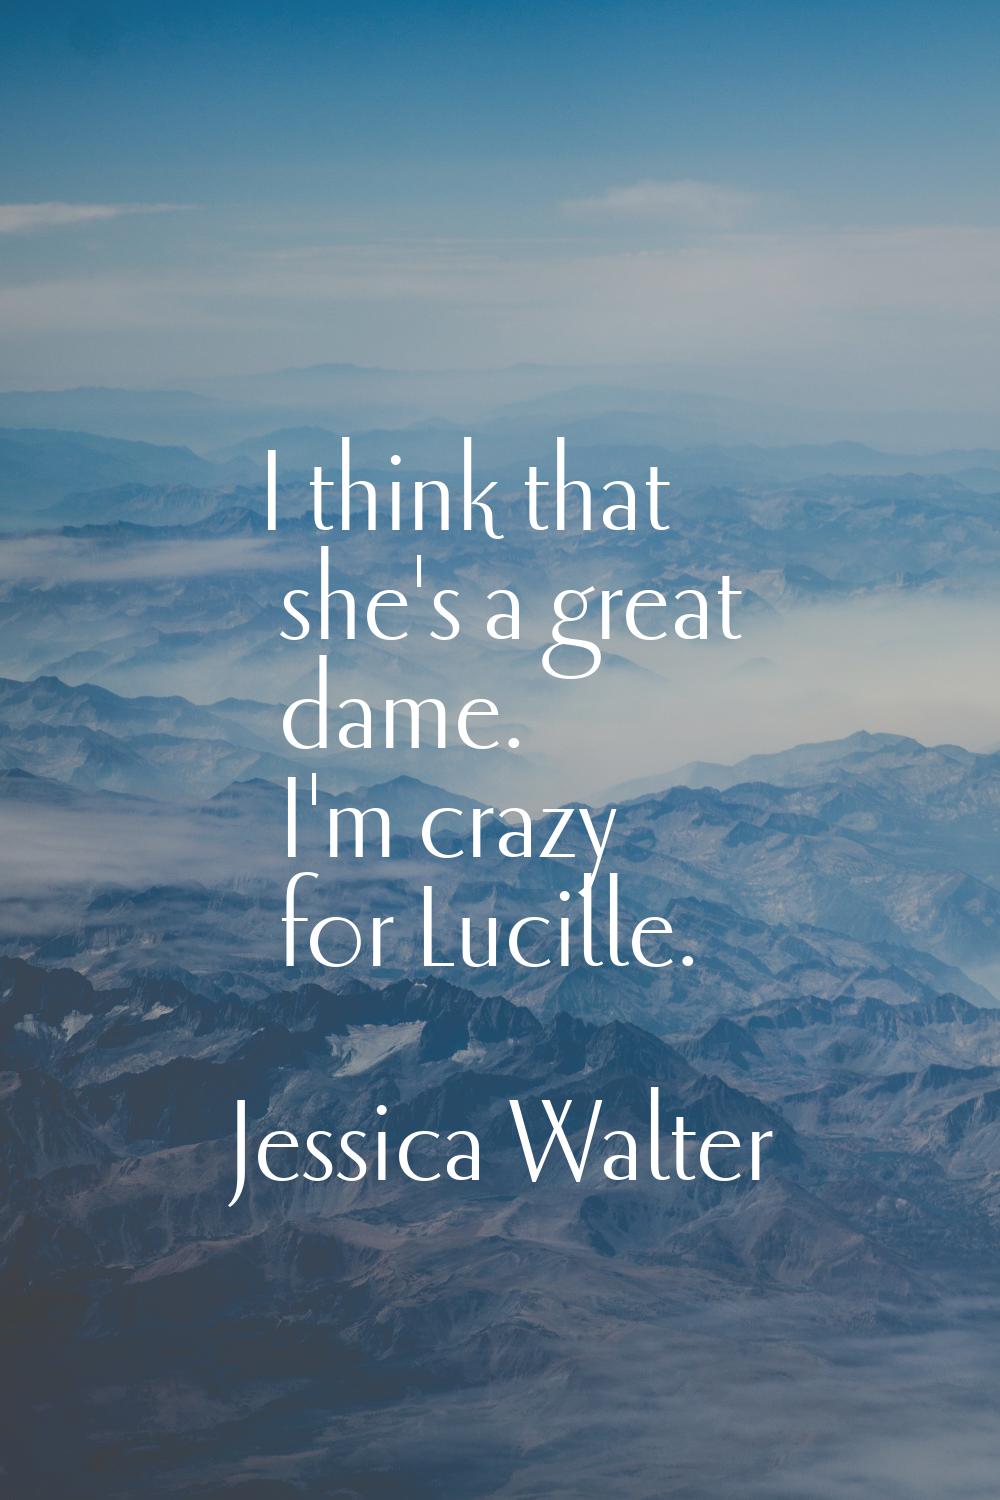 I think that she's a great dame. I'm crazy for Lucille.